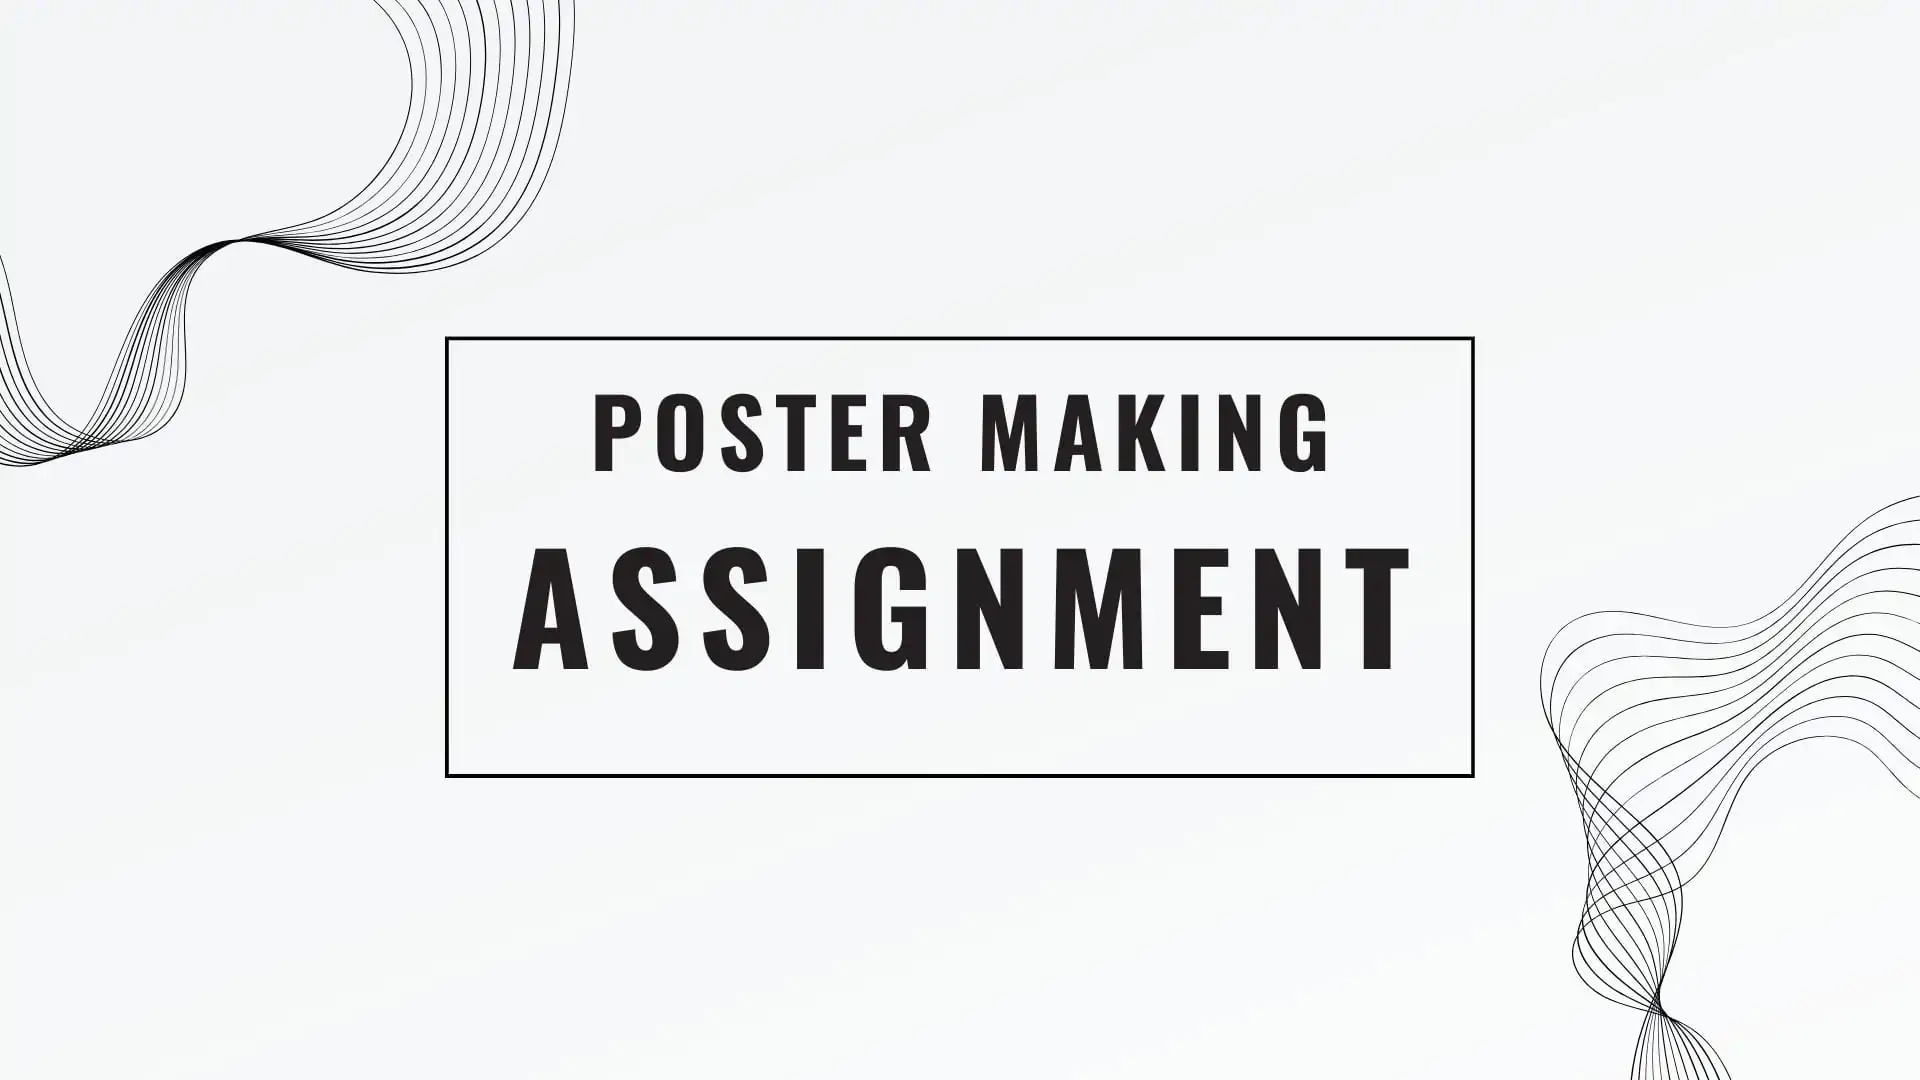 POSTER MAKING ASSIGNMENT HELP